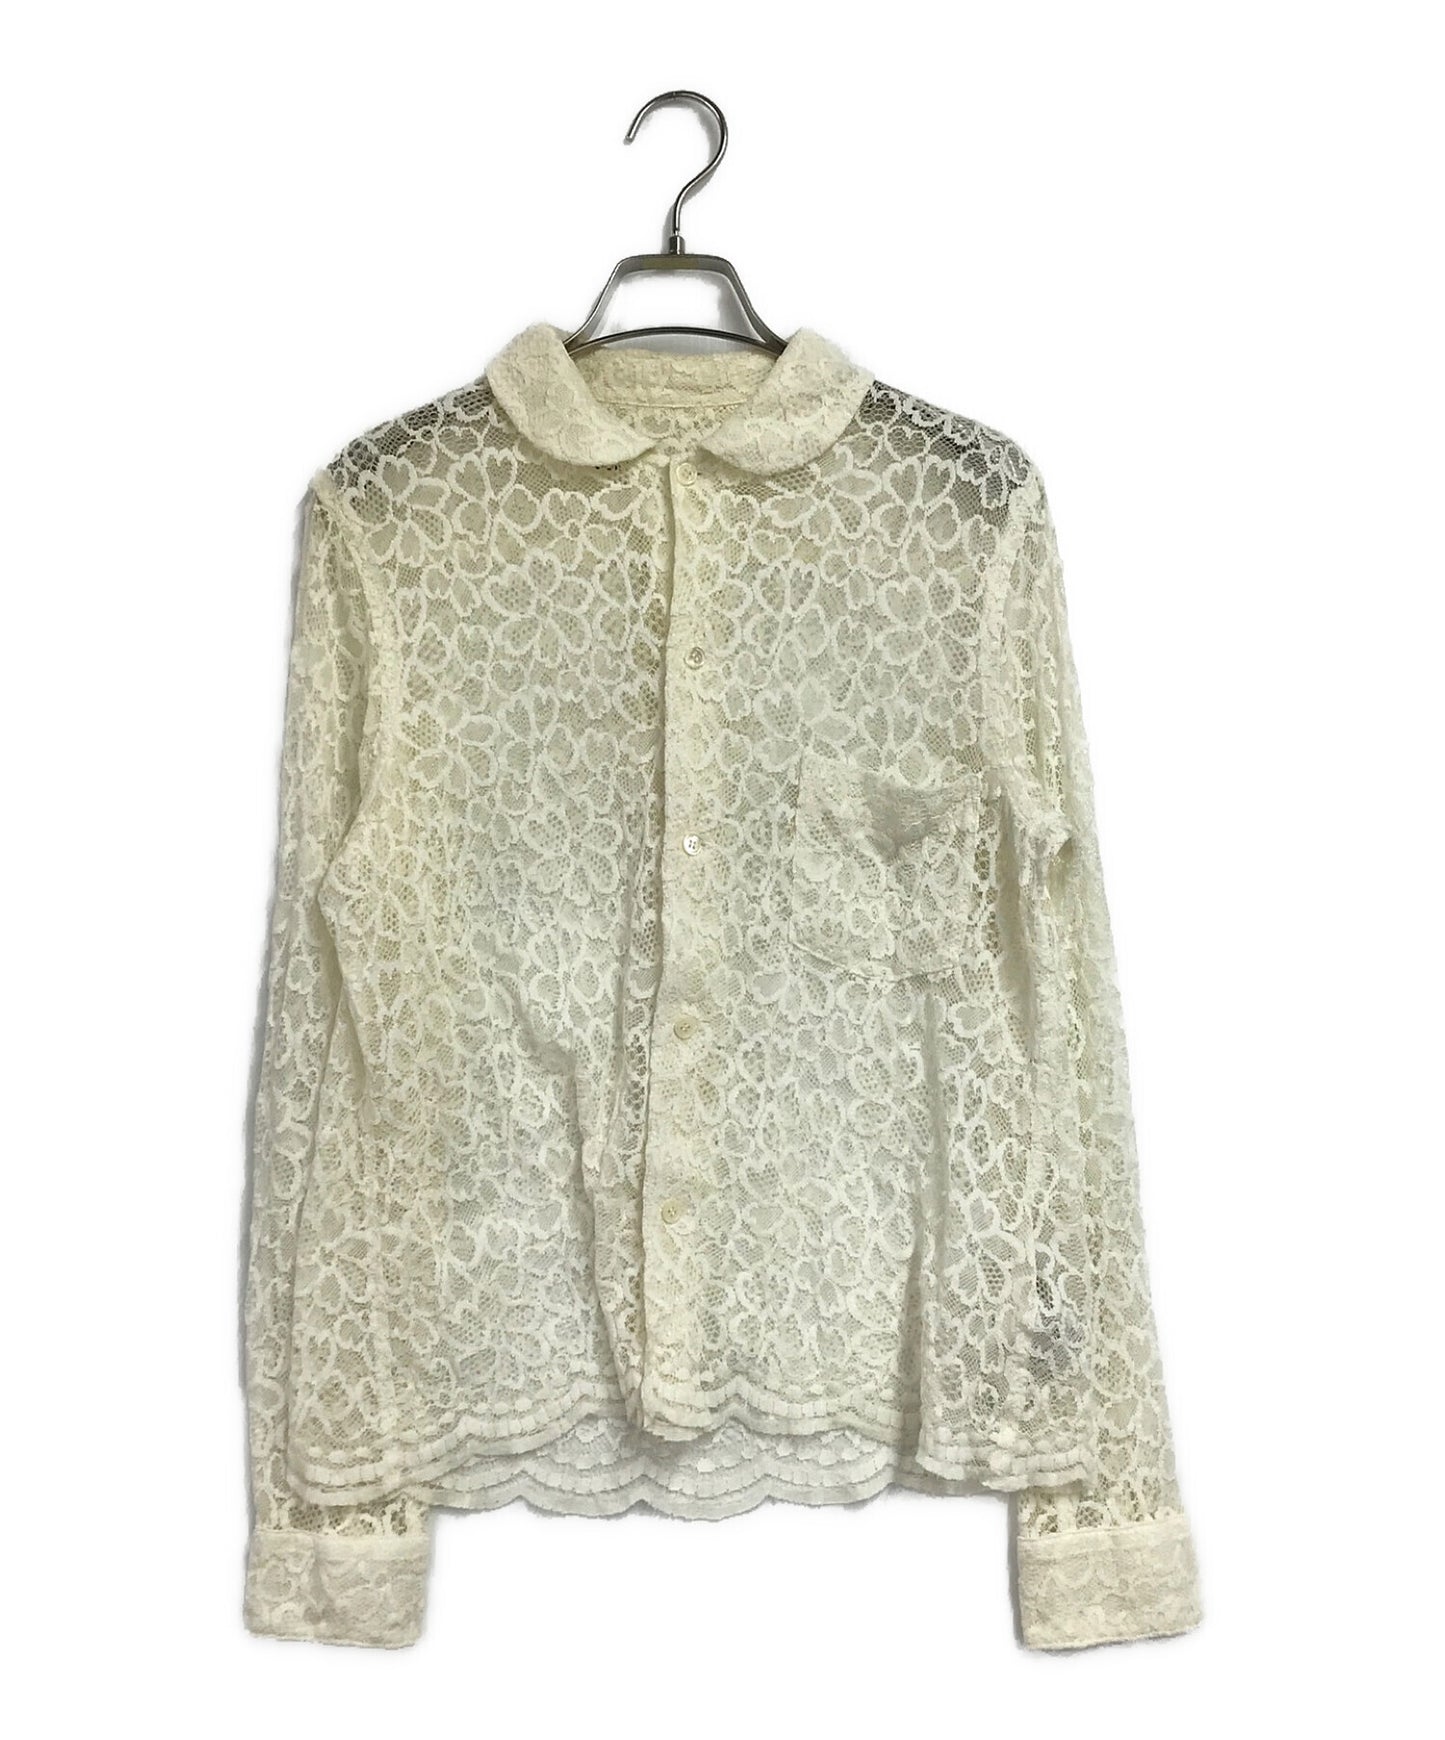 [Pre-owned] COMME des GARCONS Lace Flower Shirt GI-B026 AD2011